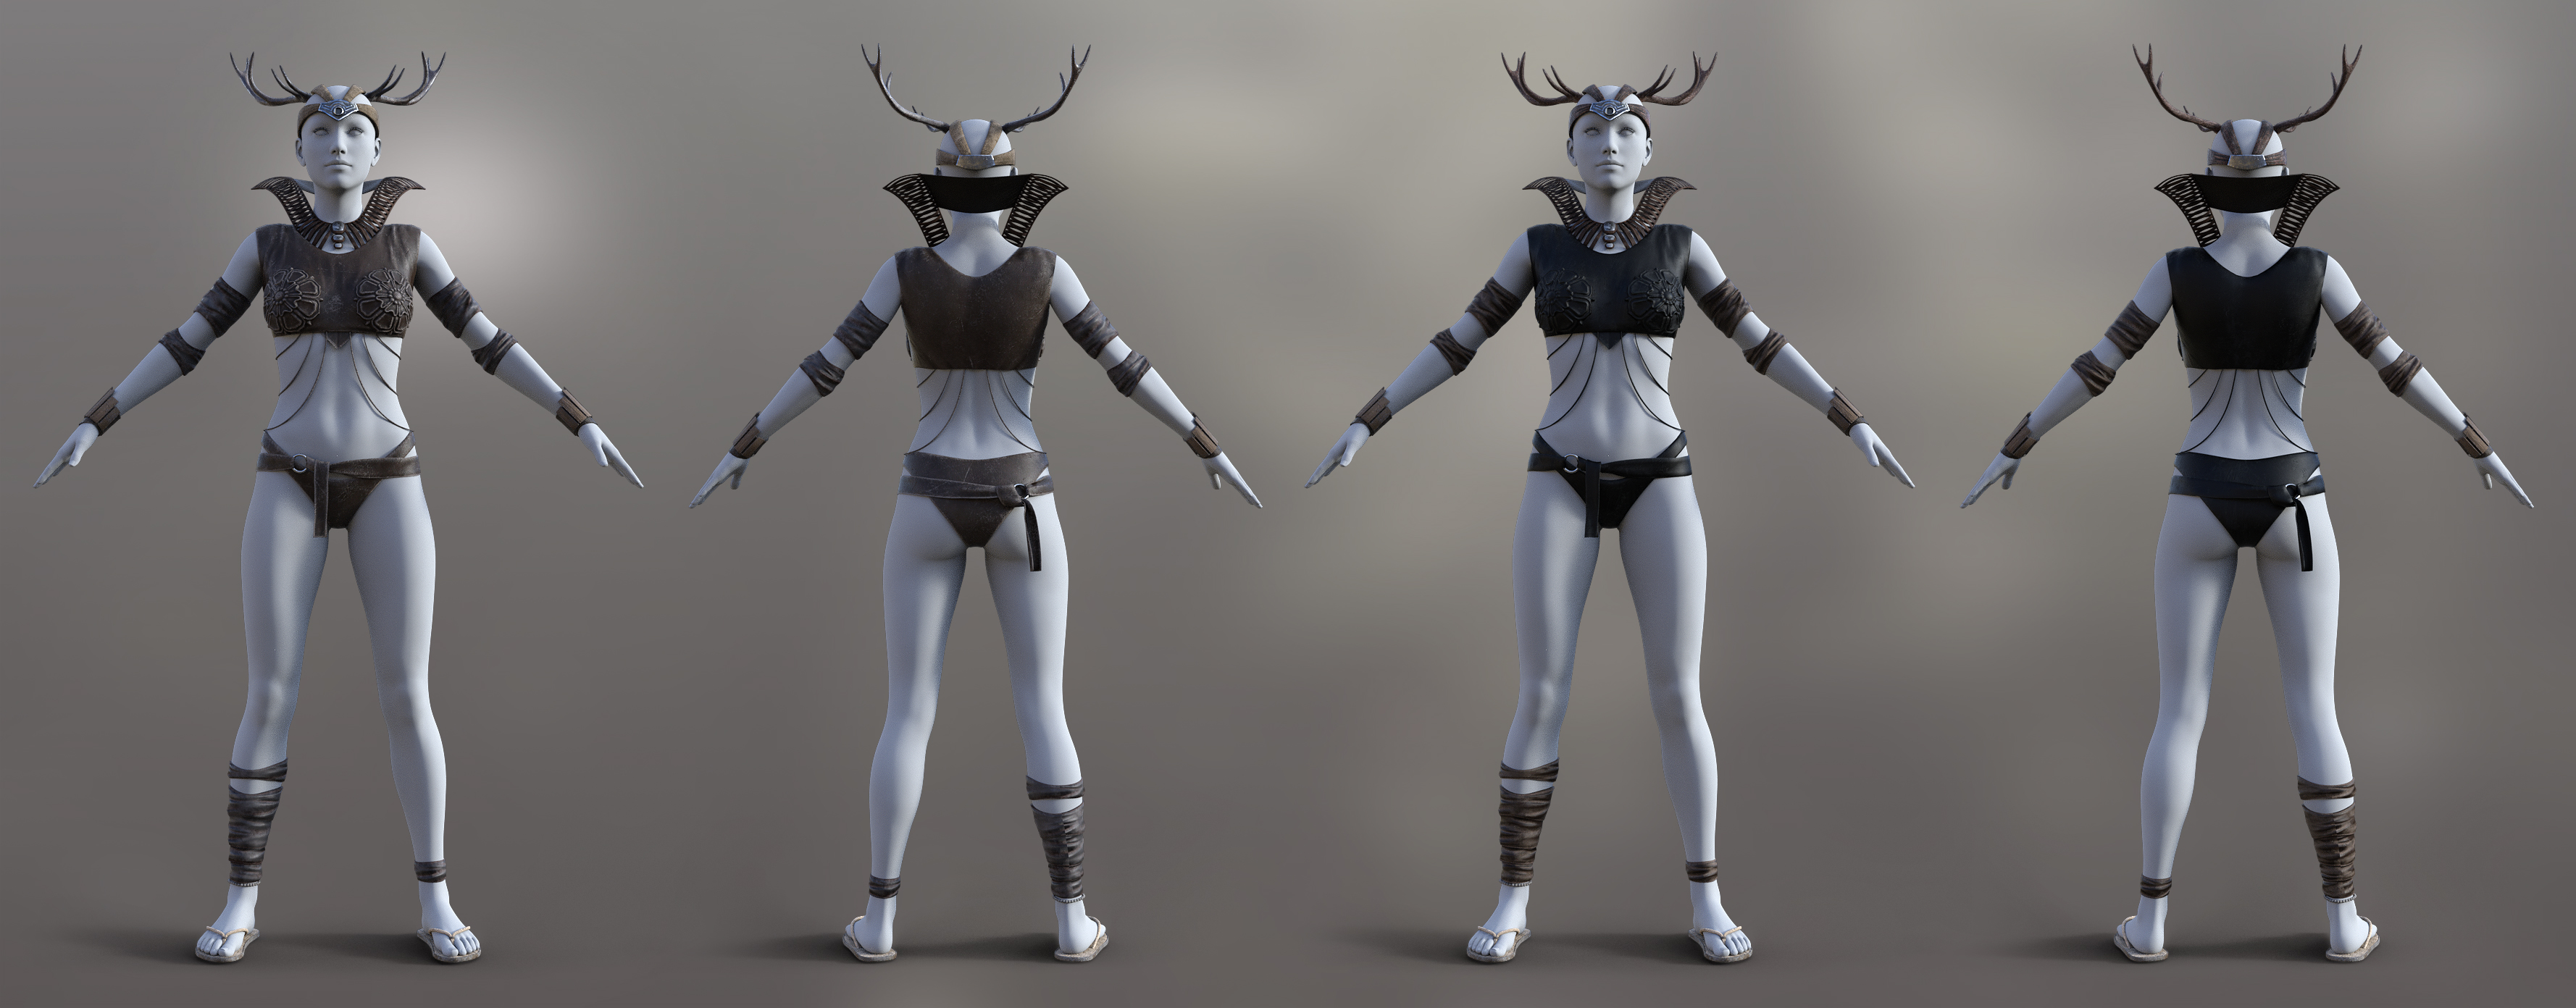 dForce Warrior Queen Outfit V2 for Genesis 8 and 8.1 Females by: fjaa3d, 3D Models by Daz 3D